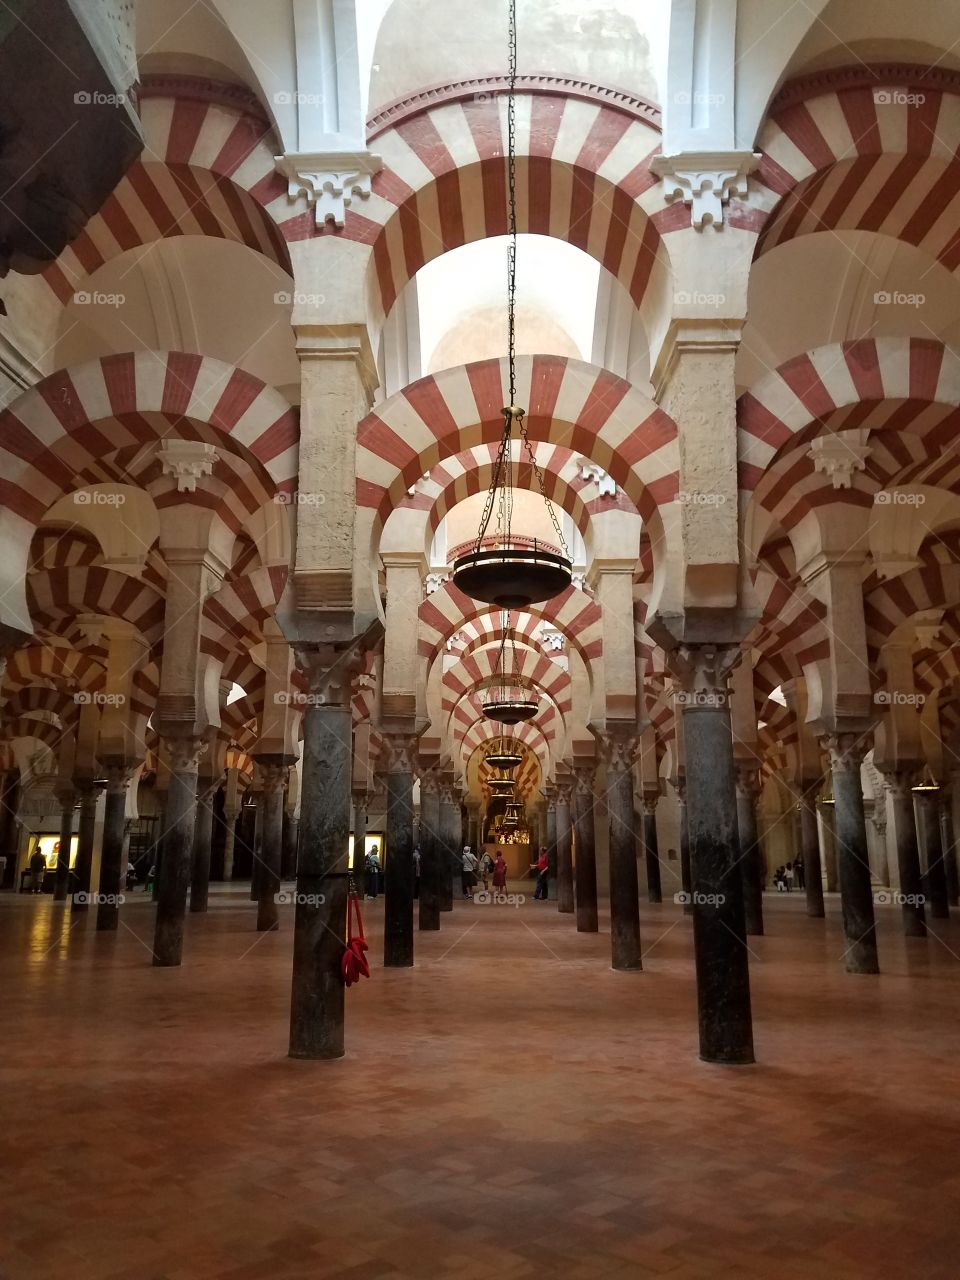 The Infinite Arches of the Mezquita